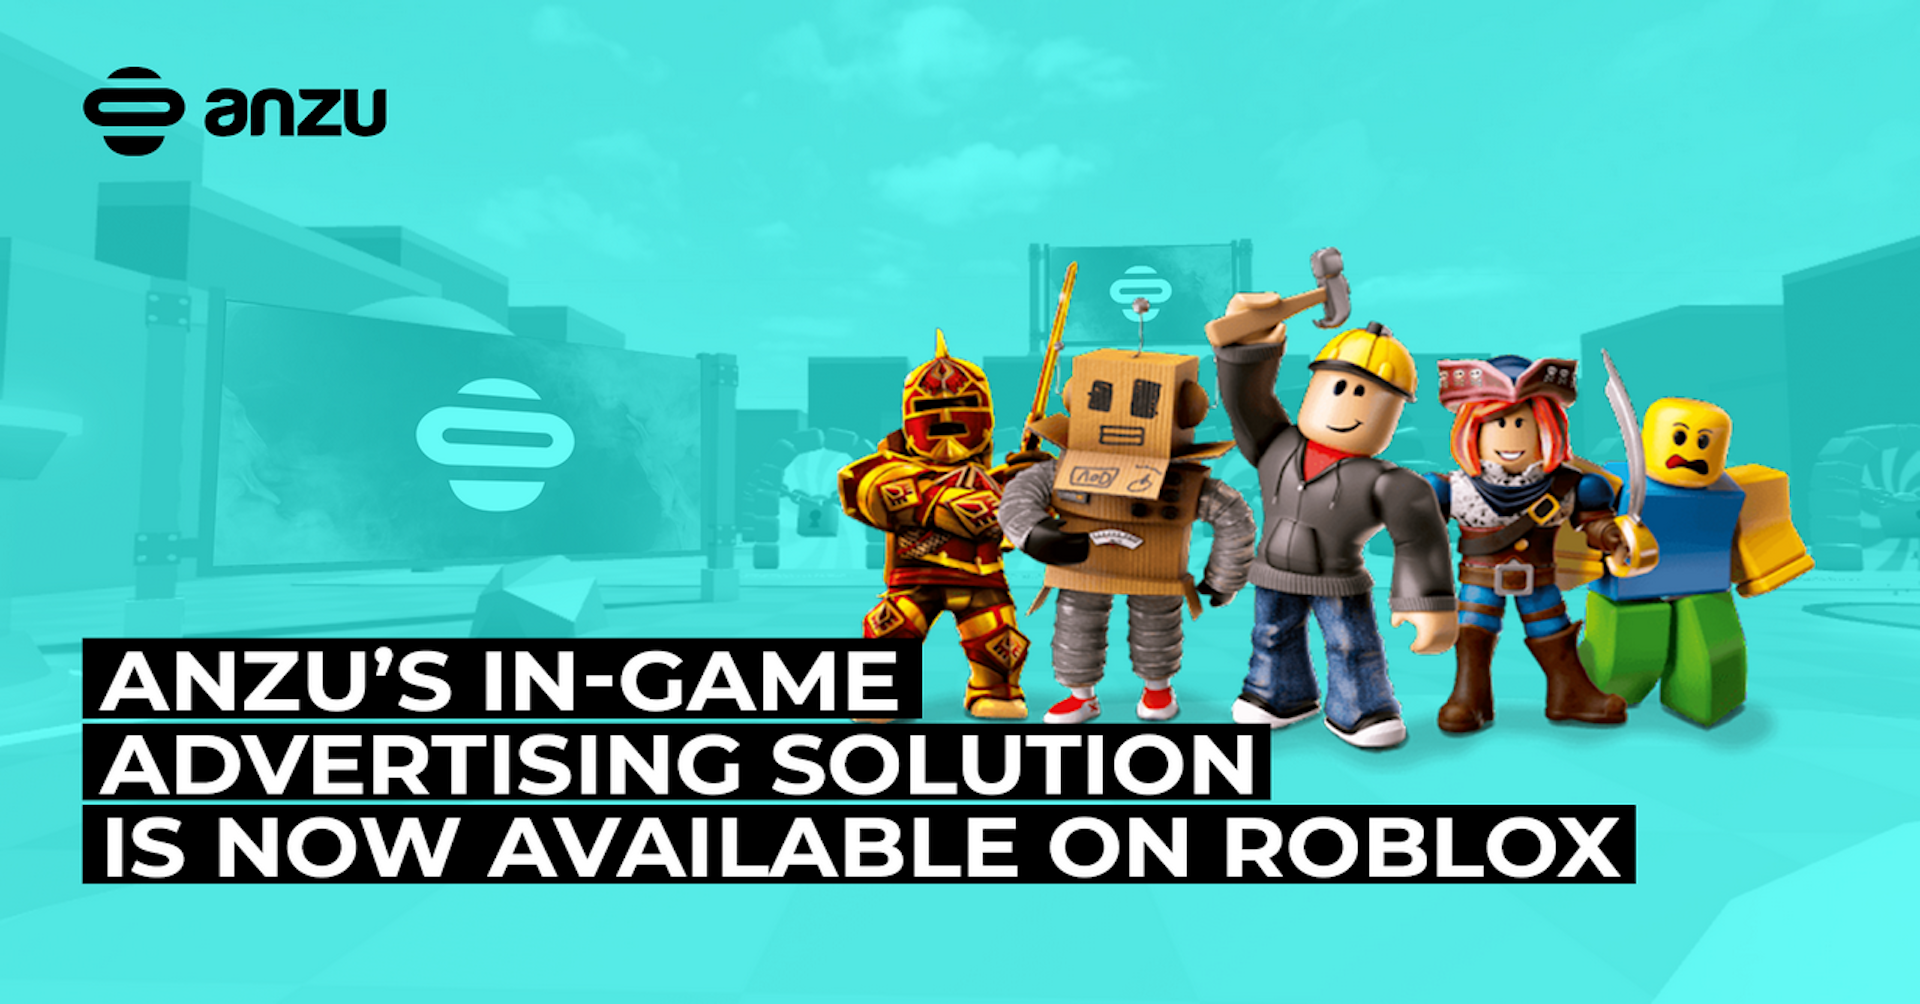 ROBLOX Adds Ability To Develop And Upload Games To Xbox One — GameTyrant